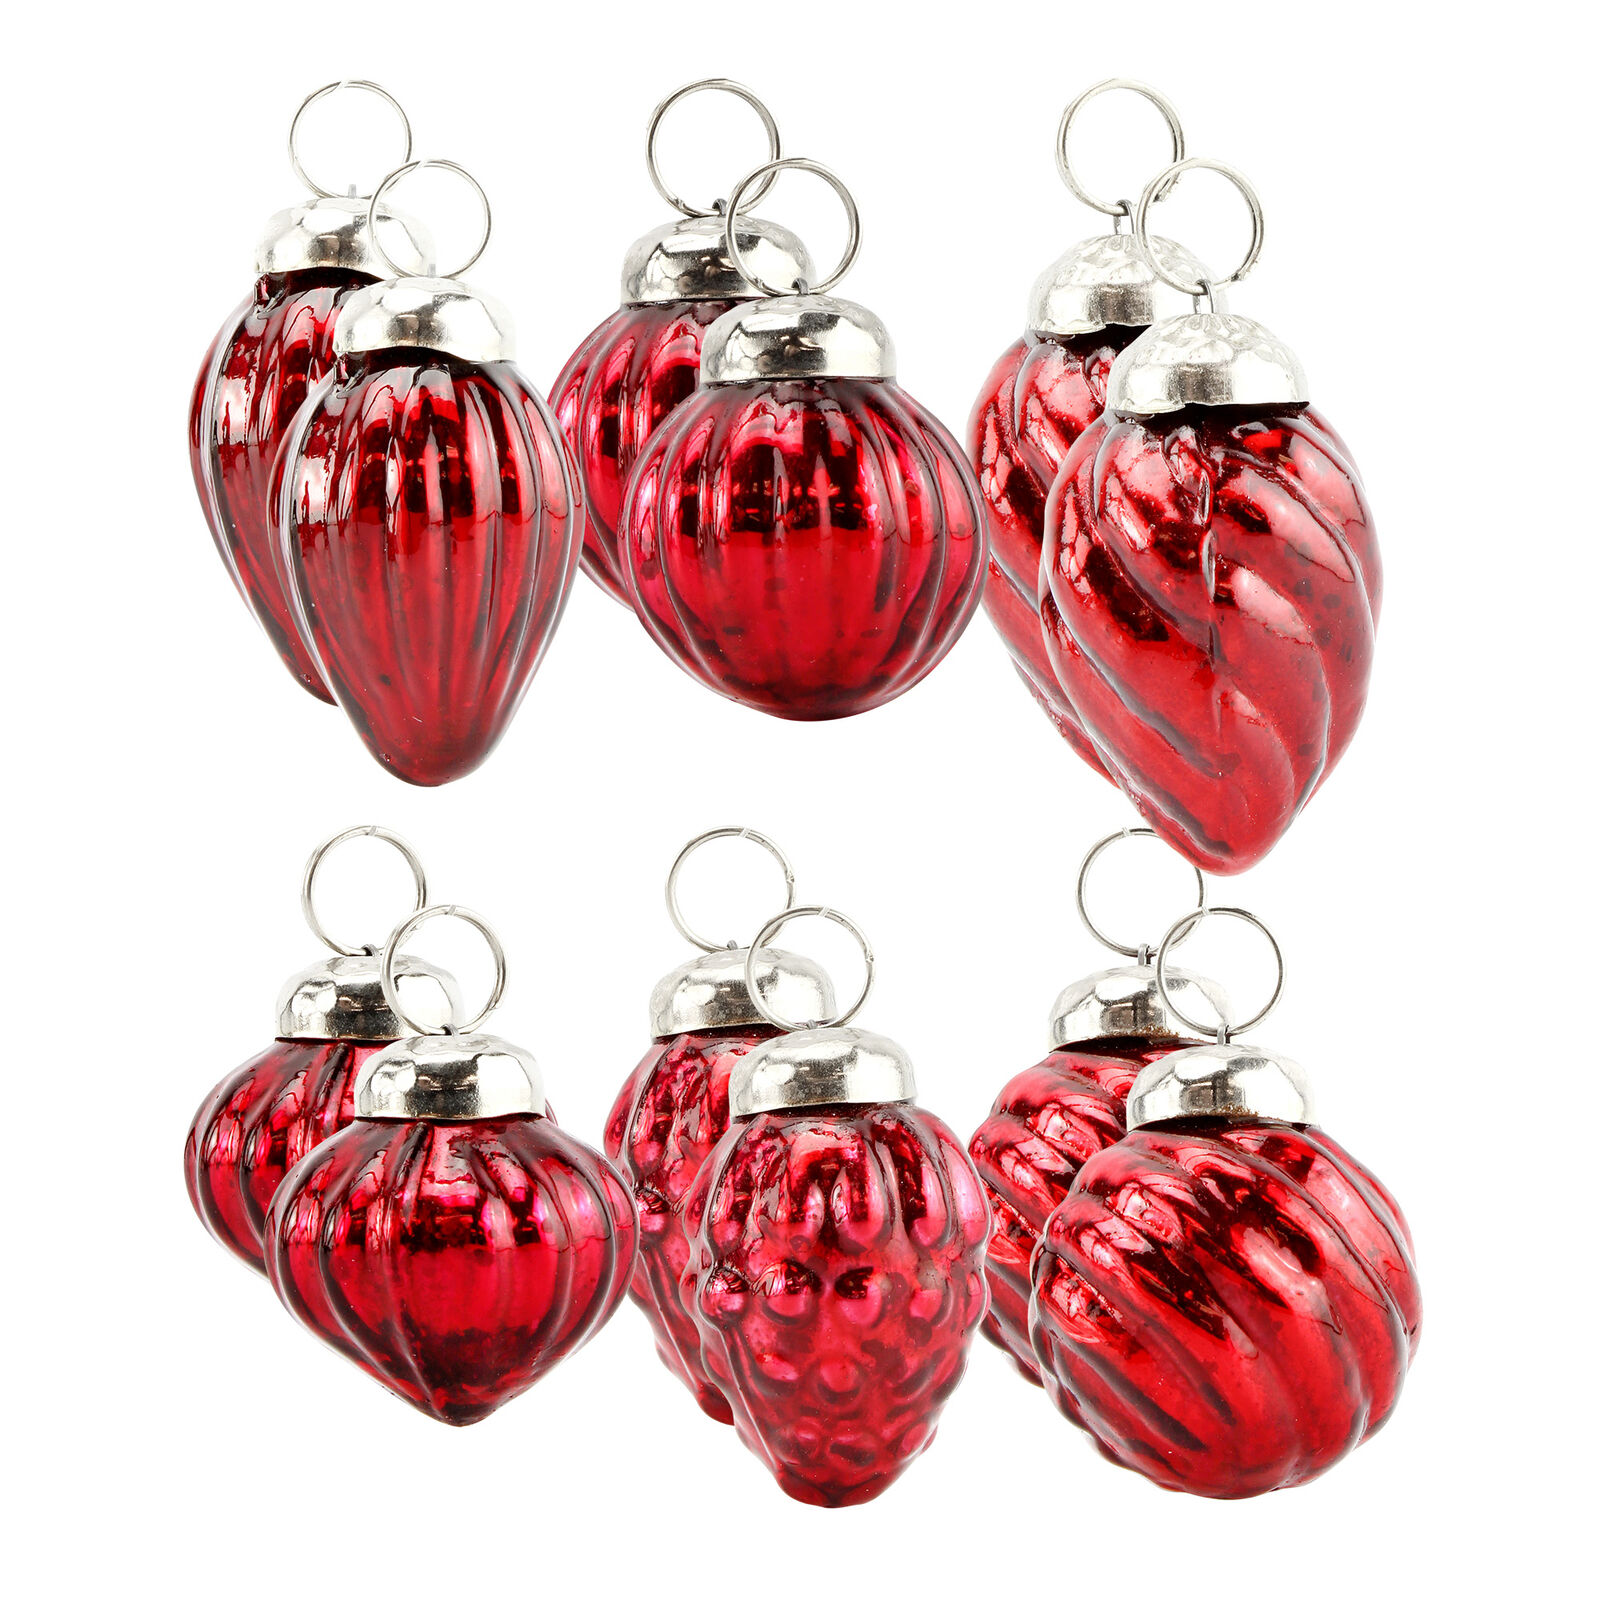 Dark Red Glass Finial Ornaments Small Set of 12, Antiqued Dark Red Ornaments